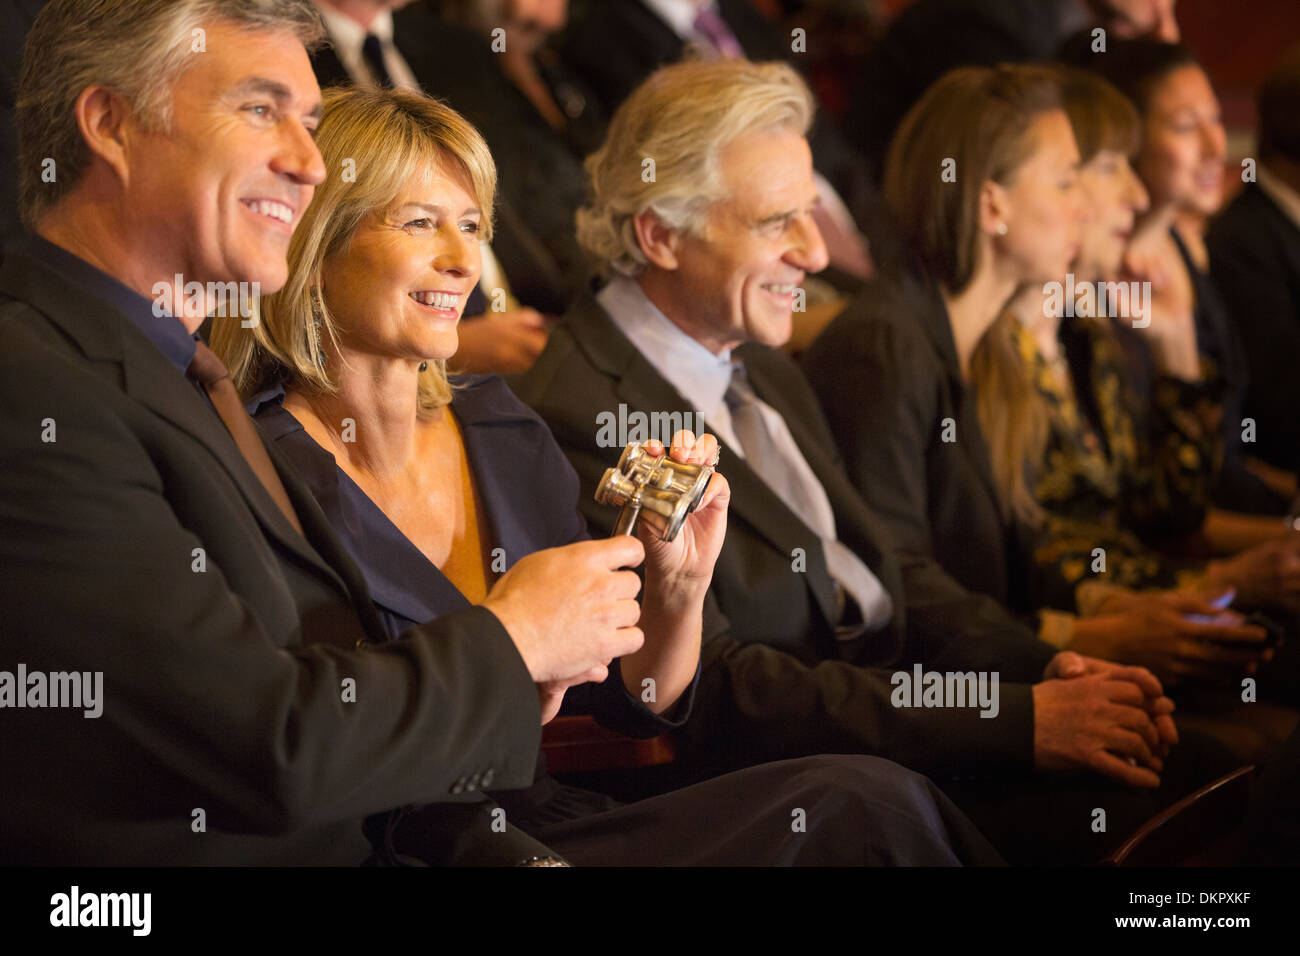 Smiling couple holding opera glasses in theater audience Stock Photo